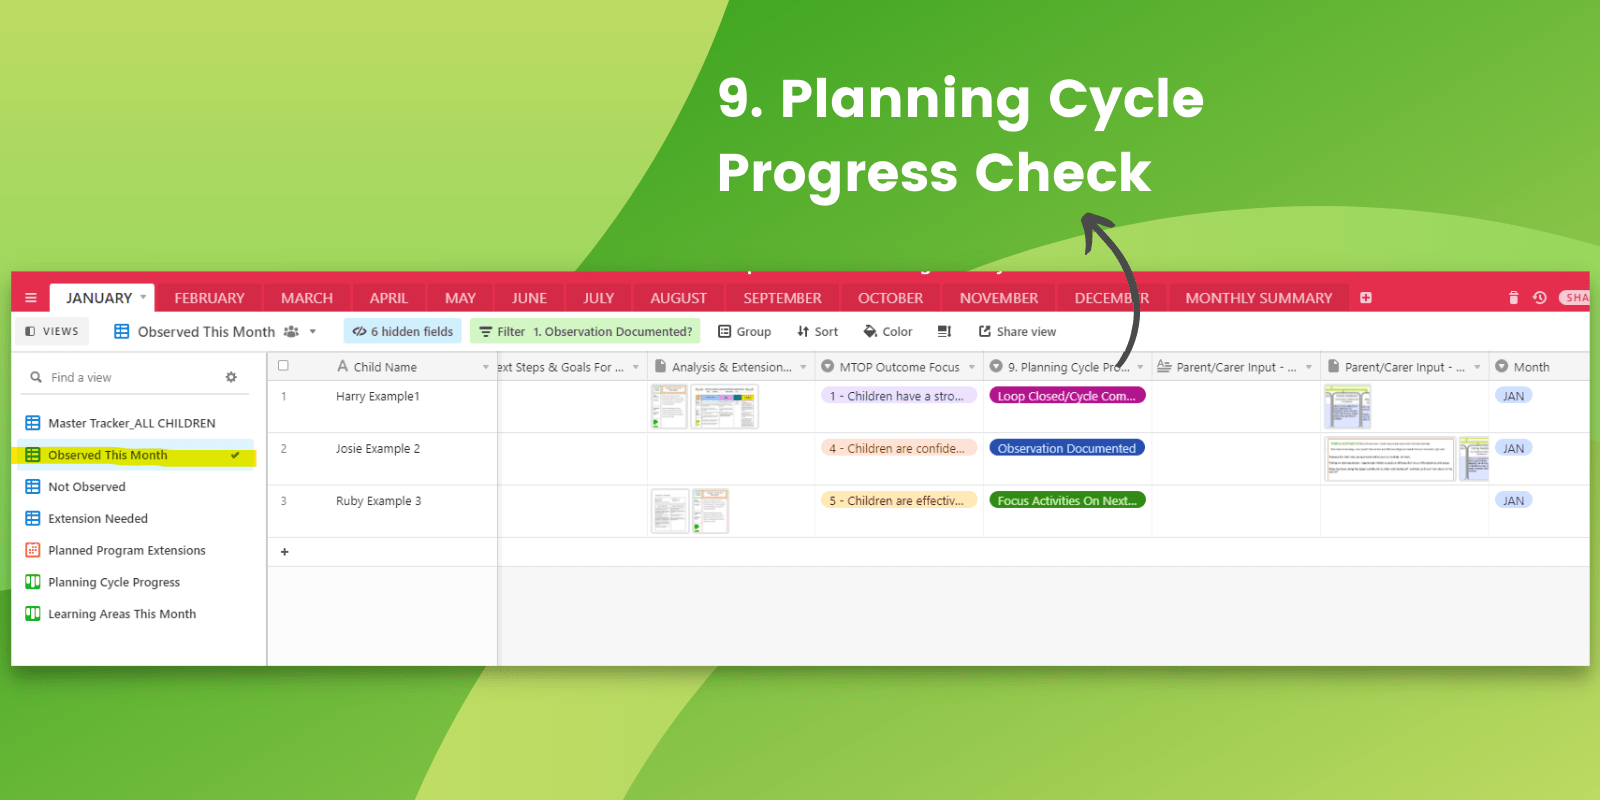 Keep track of your observations each month and how you are using that information step by step to close the loop on your planning cycle.